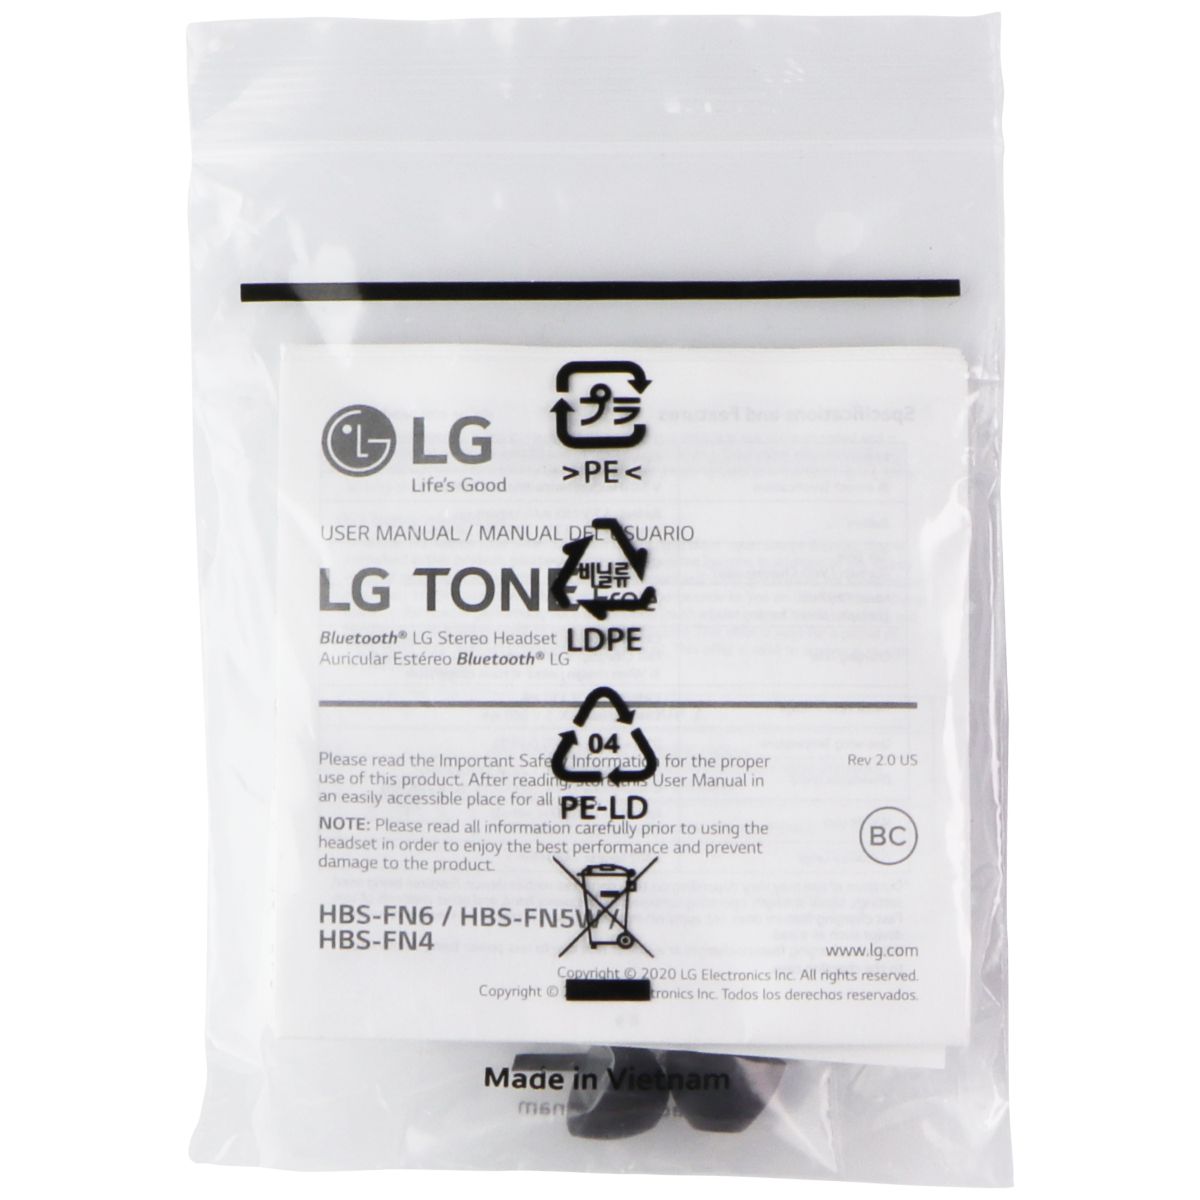 Replacement Rubber Ear Gels for LG Tone Free Headset (HBS-FN6/HBS-FN5W/HBS-FN4) Cell Phone - Replacement Parts & Tools LG    - Simple Cell Bulk Wholesale Pricing - USA Seller